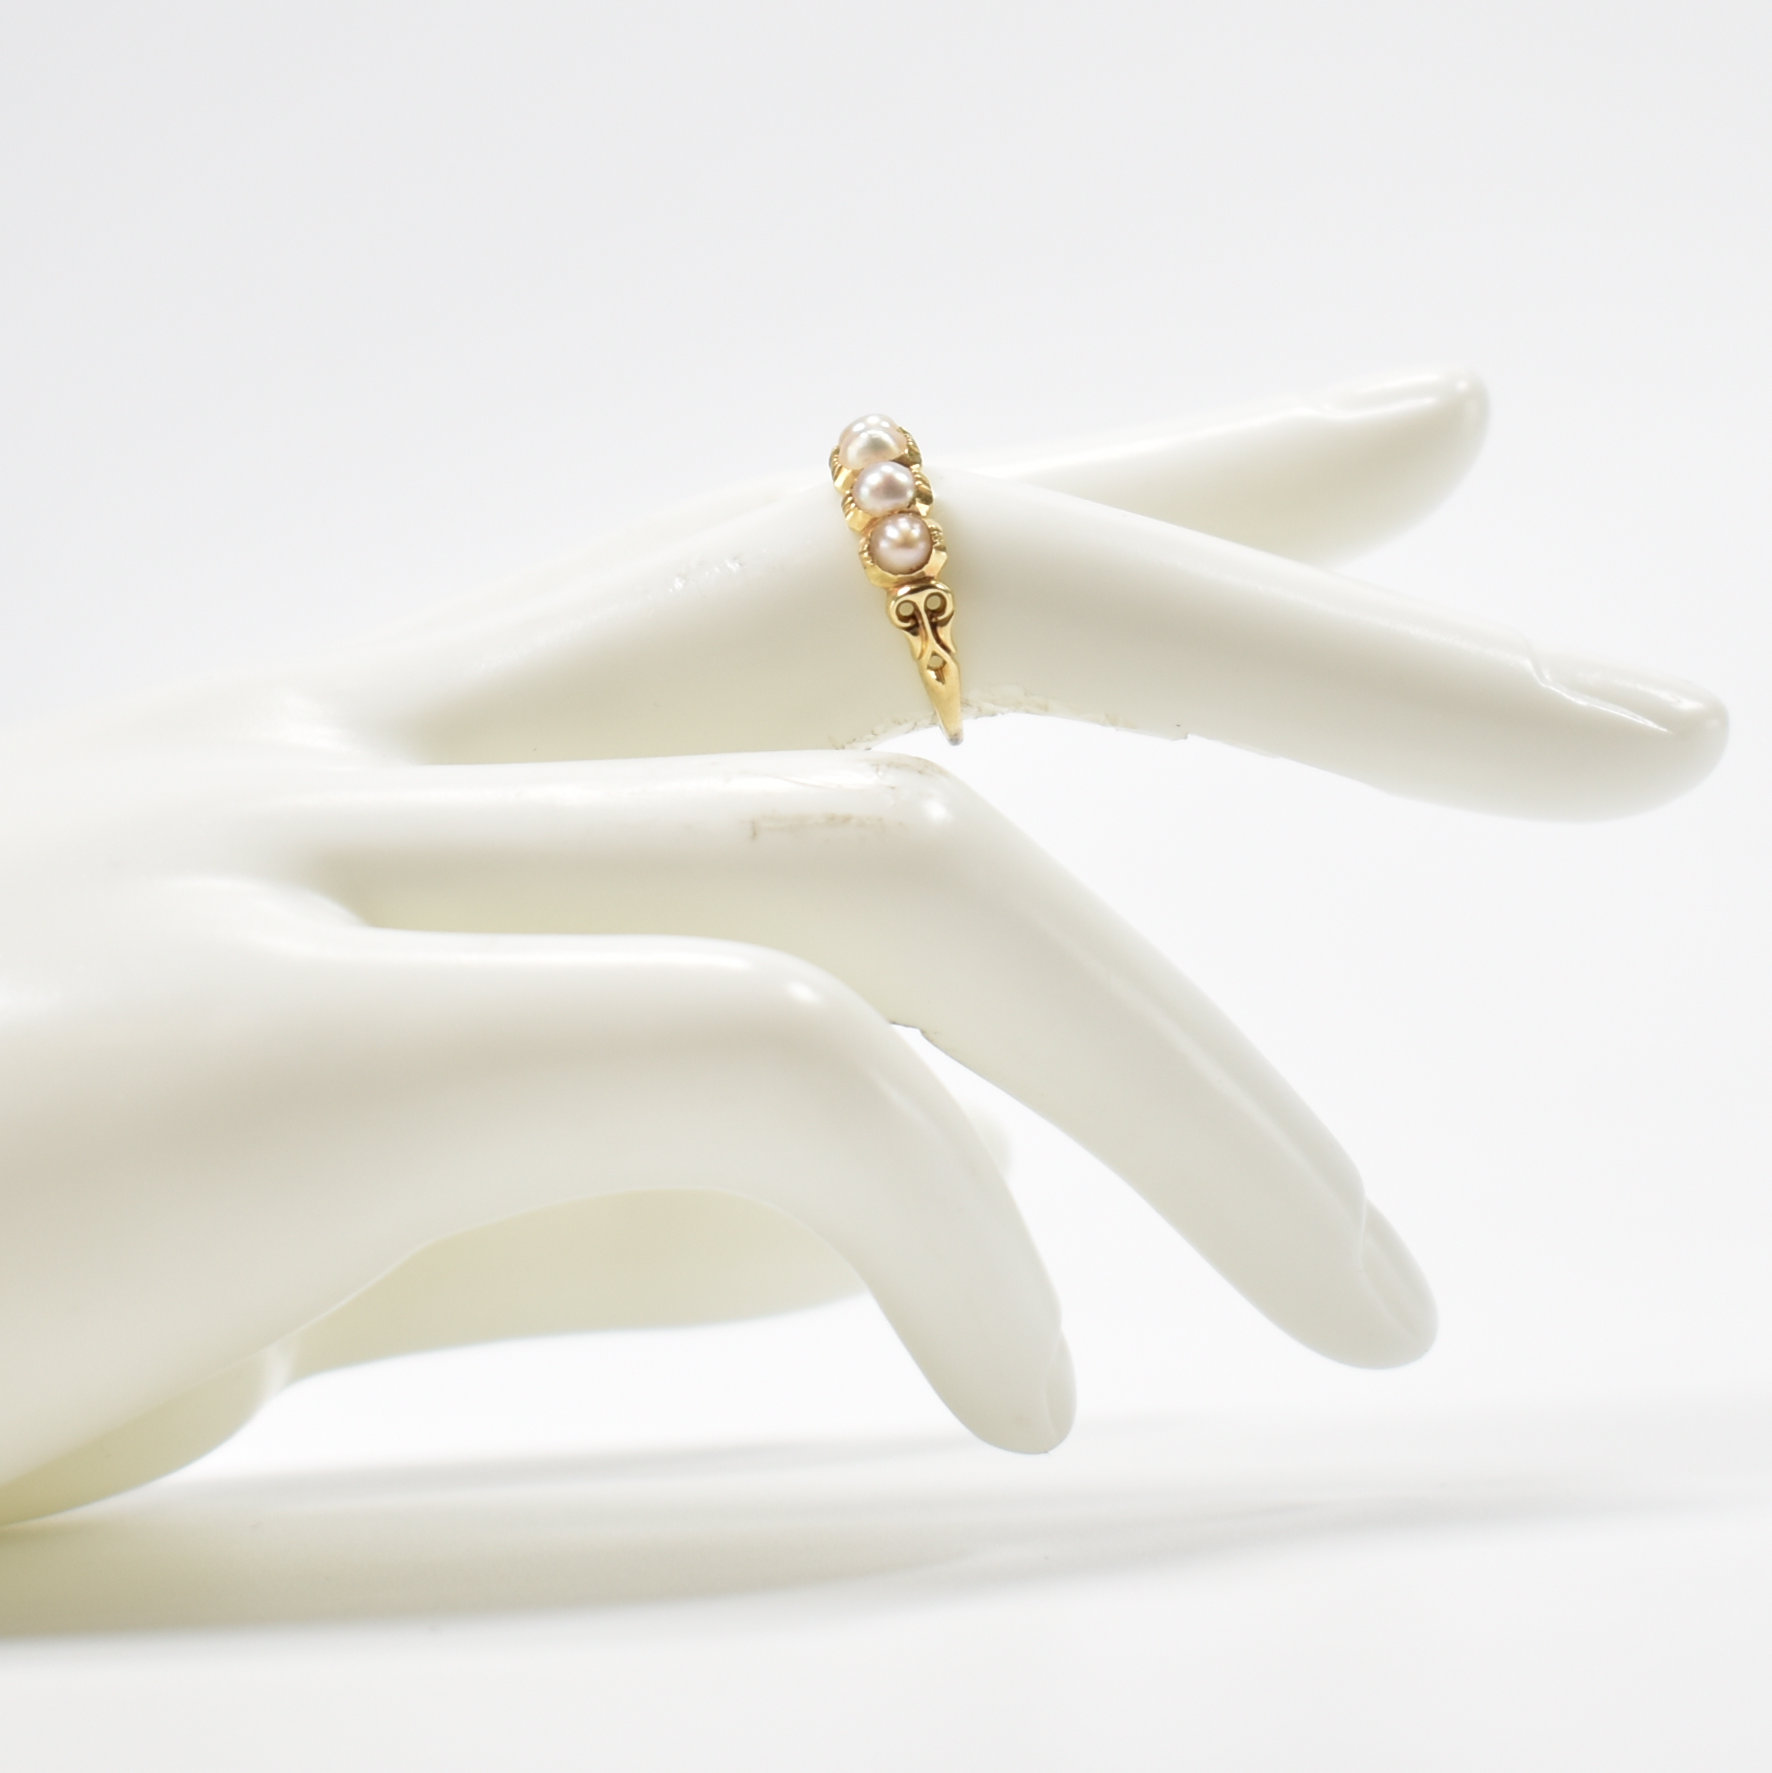 VICTORIAN GOLD FIVE STONE PEARL RING - Image 6 of 6